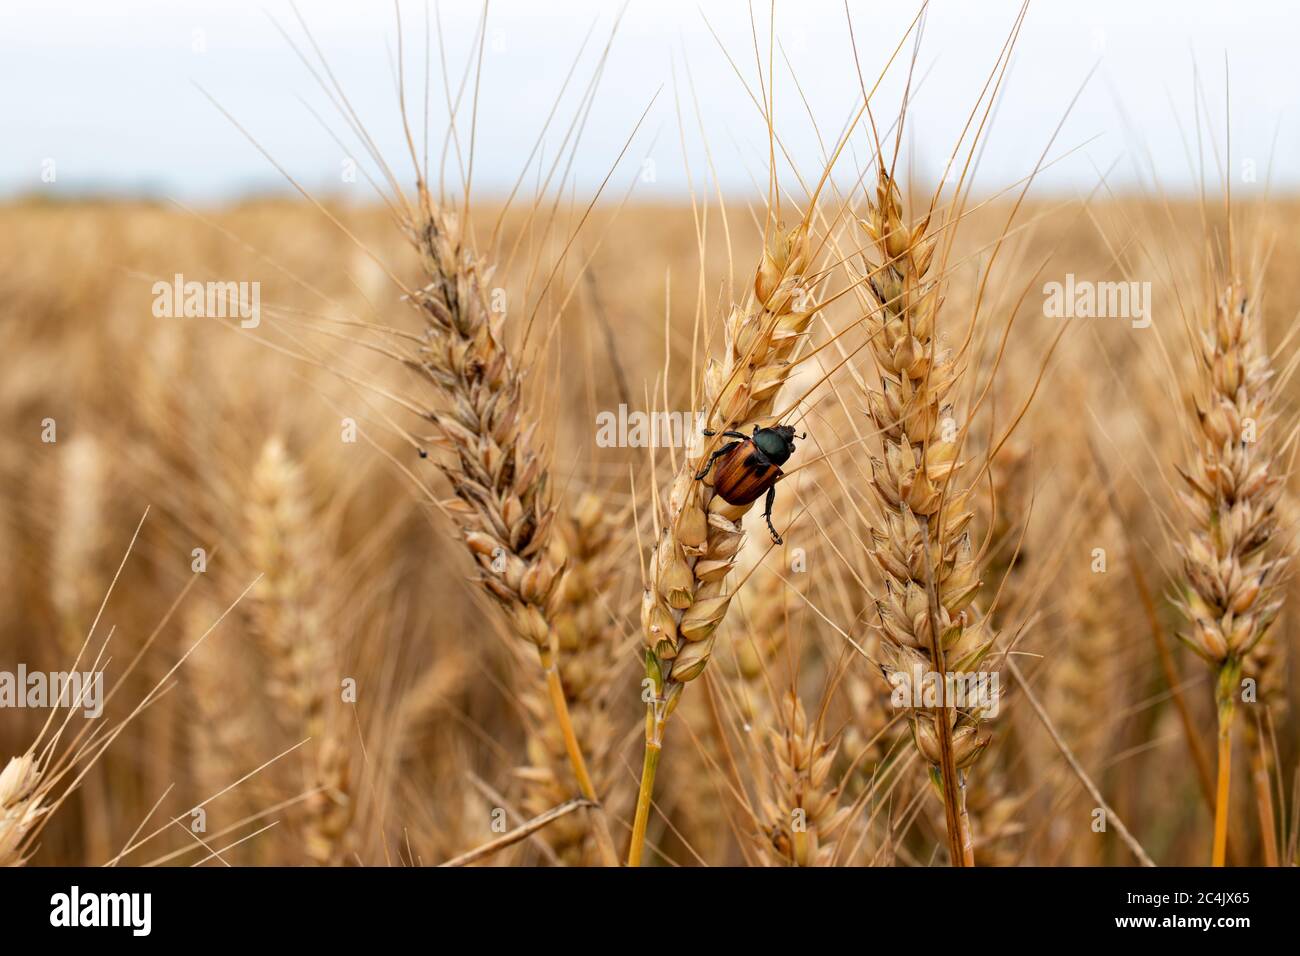 Pest infested wheat field. Locust of agricultural crops, the Grain Beetle (lat. Anisoplia Austriaca) on the ripe wheat ears. Stock Photo